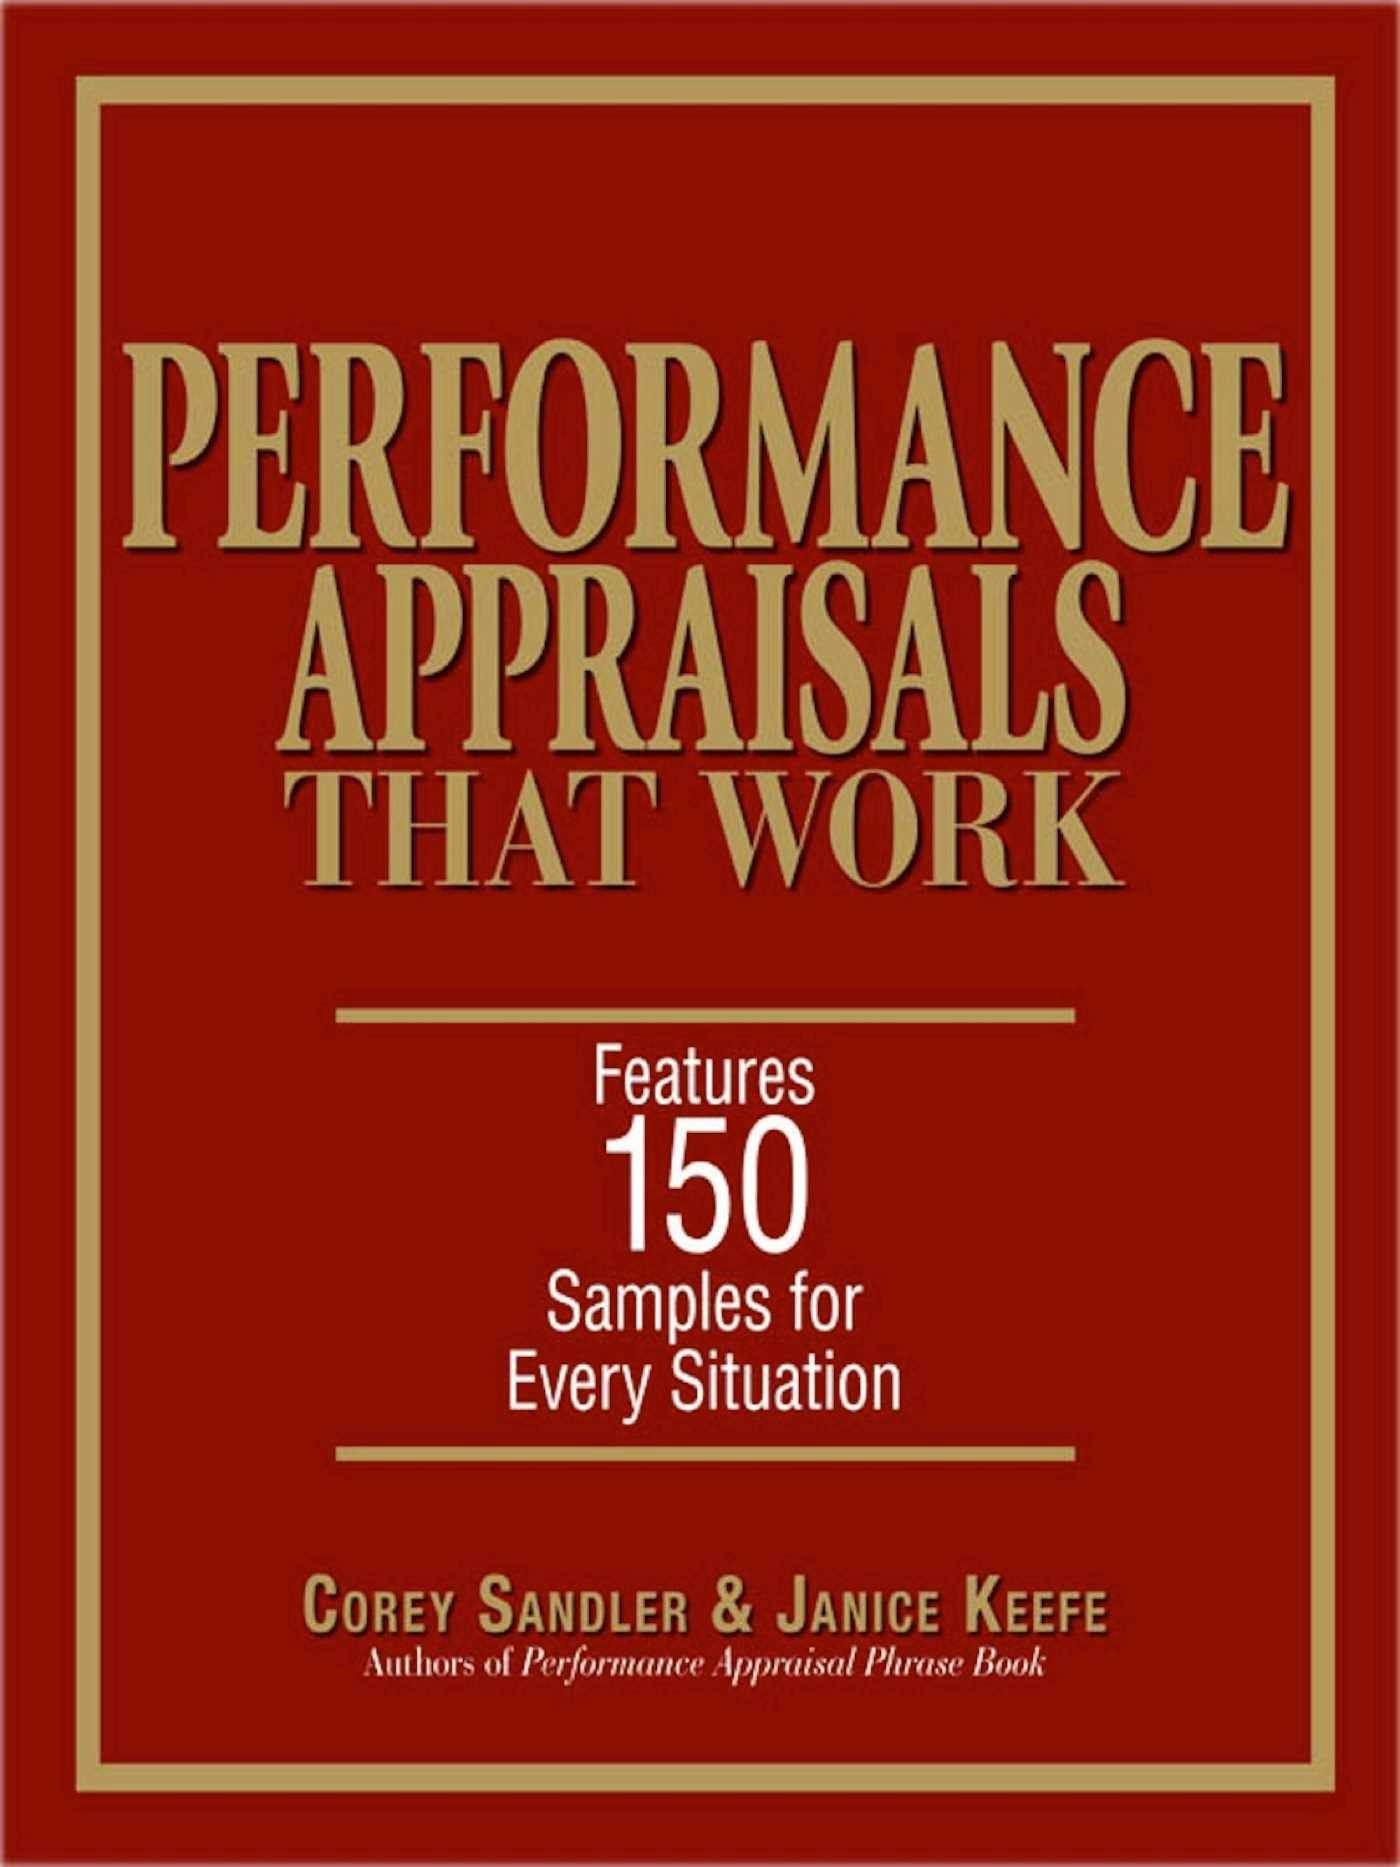 Performance Appraisals That Work: Features 150 Samples for Every Situation - Corey Sandler, Janice Keefe